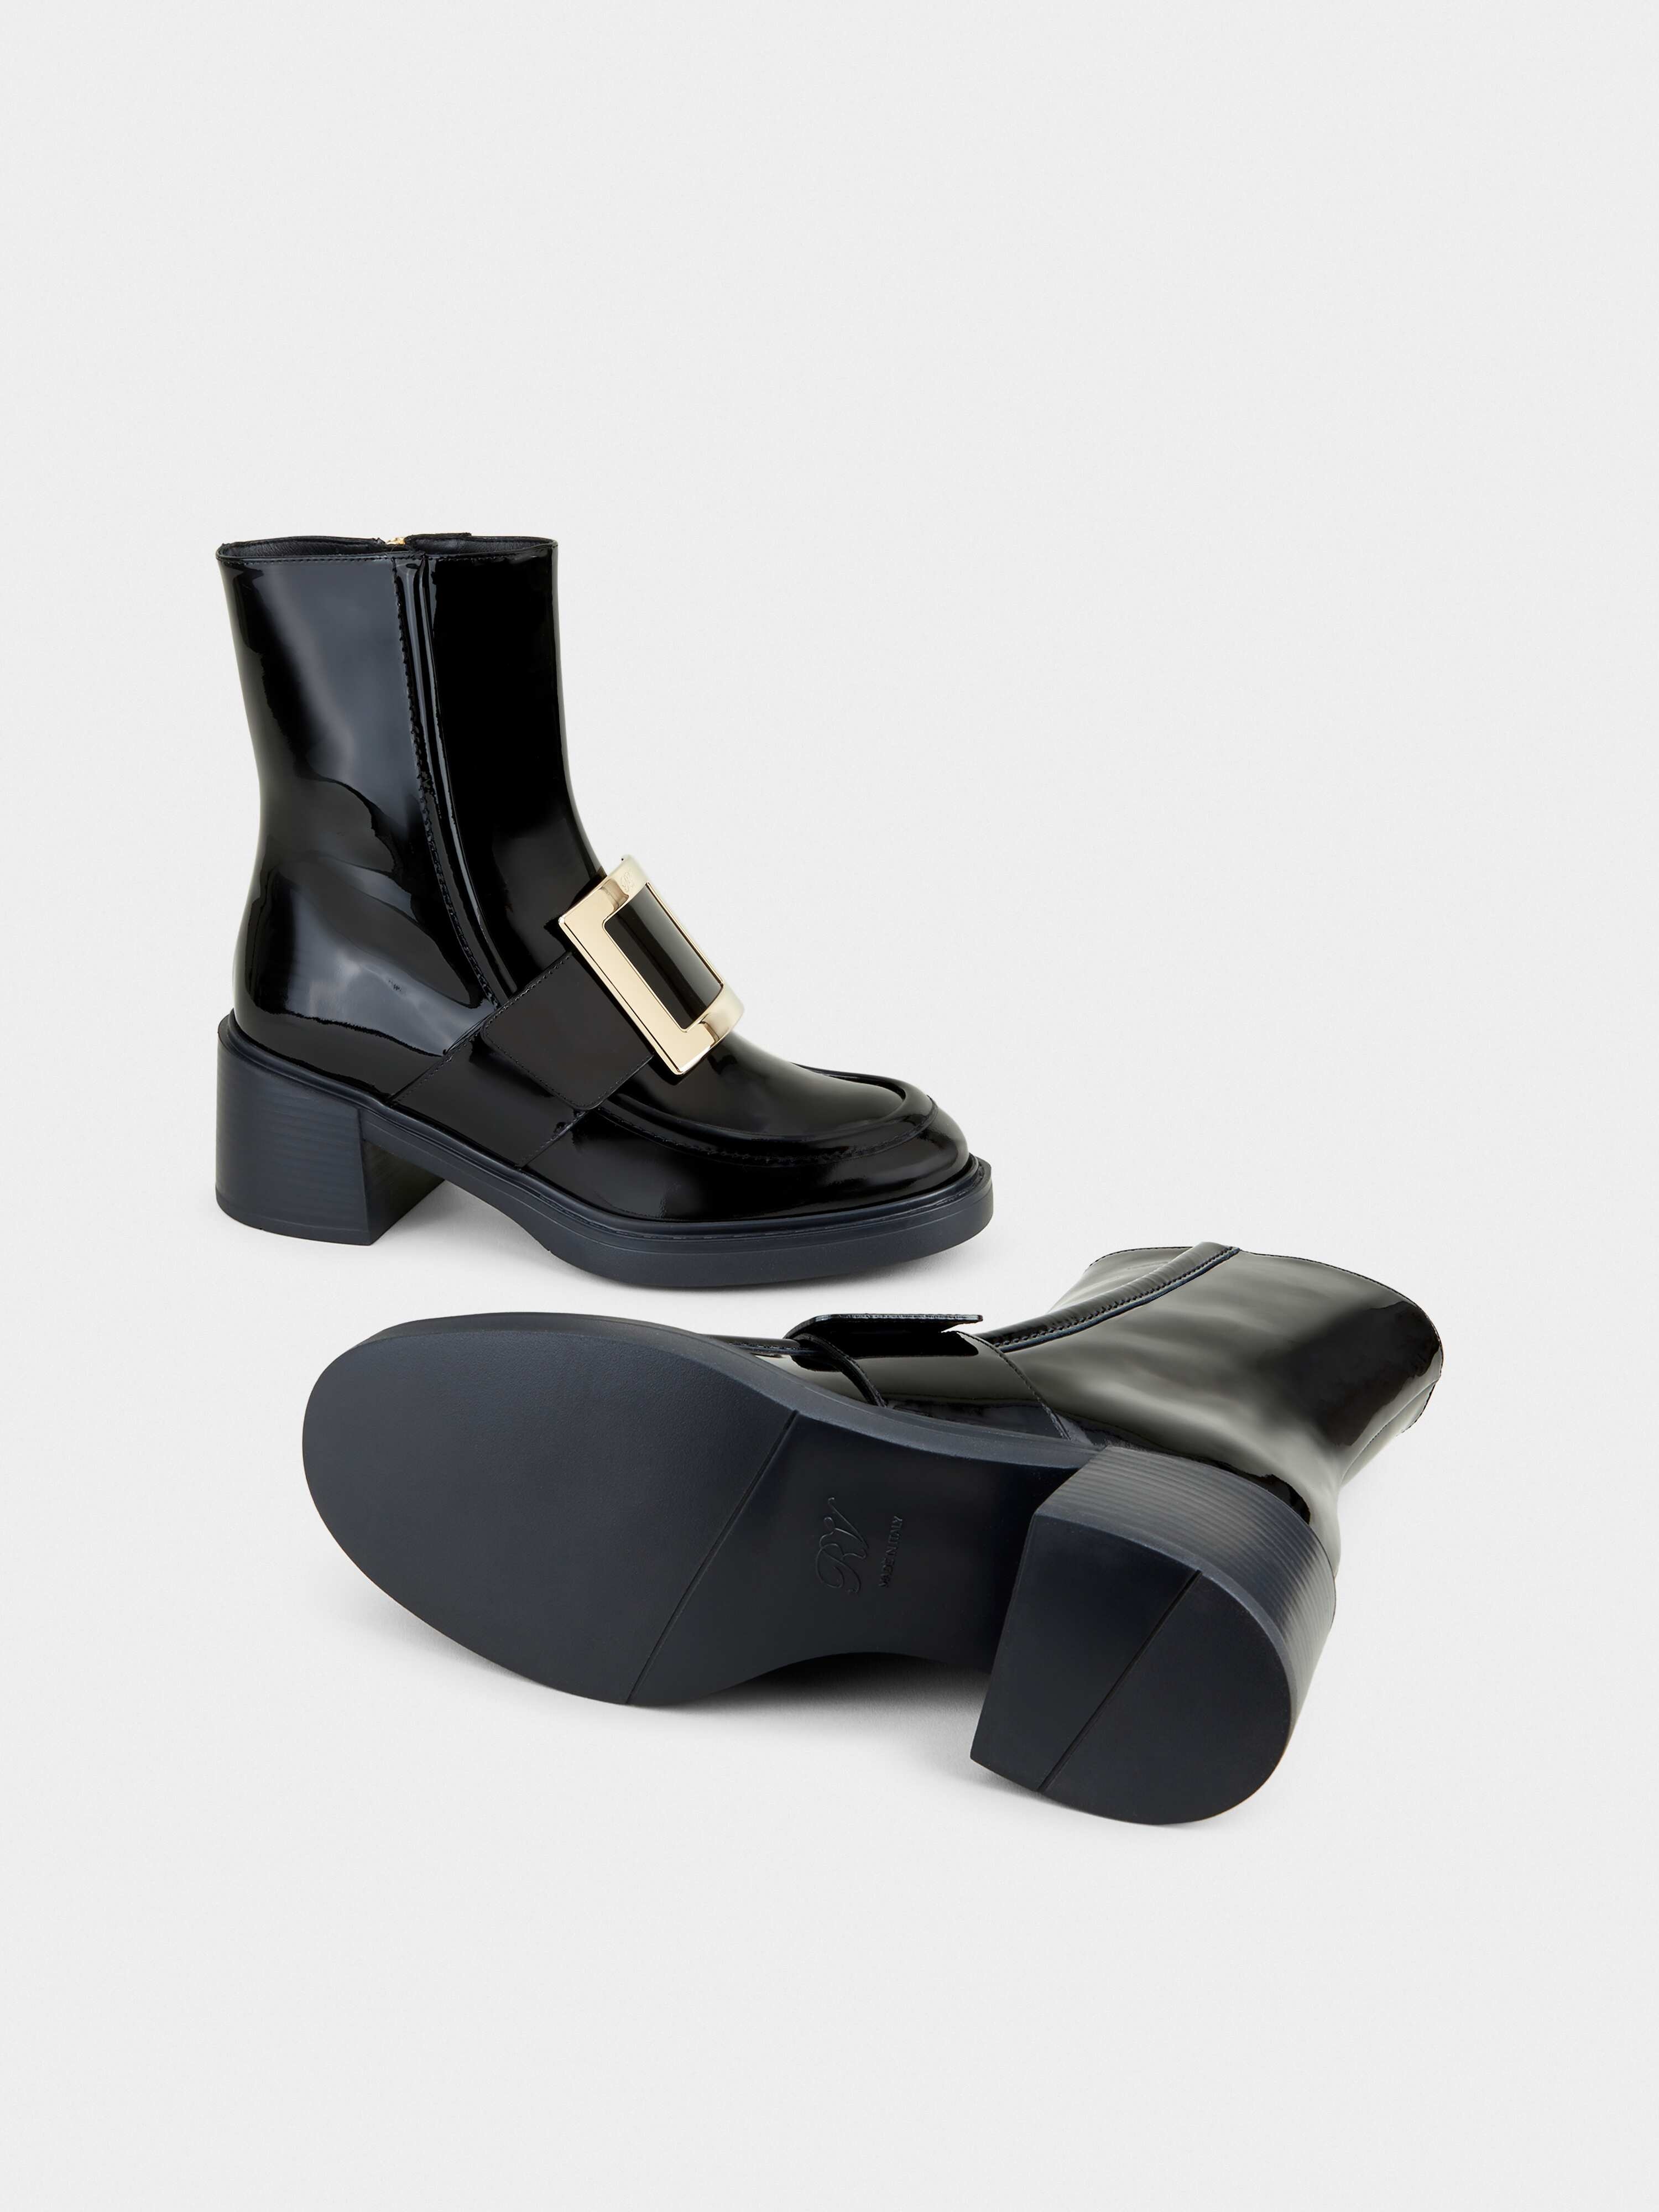 Viv' Rangers Metal Buckle Ankle Boots in Patent Leather - 6